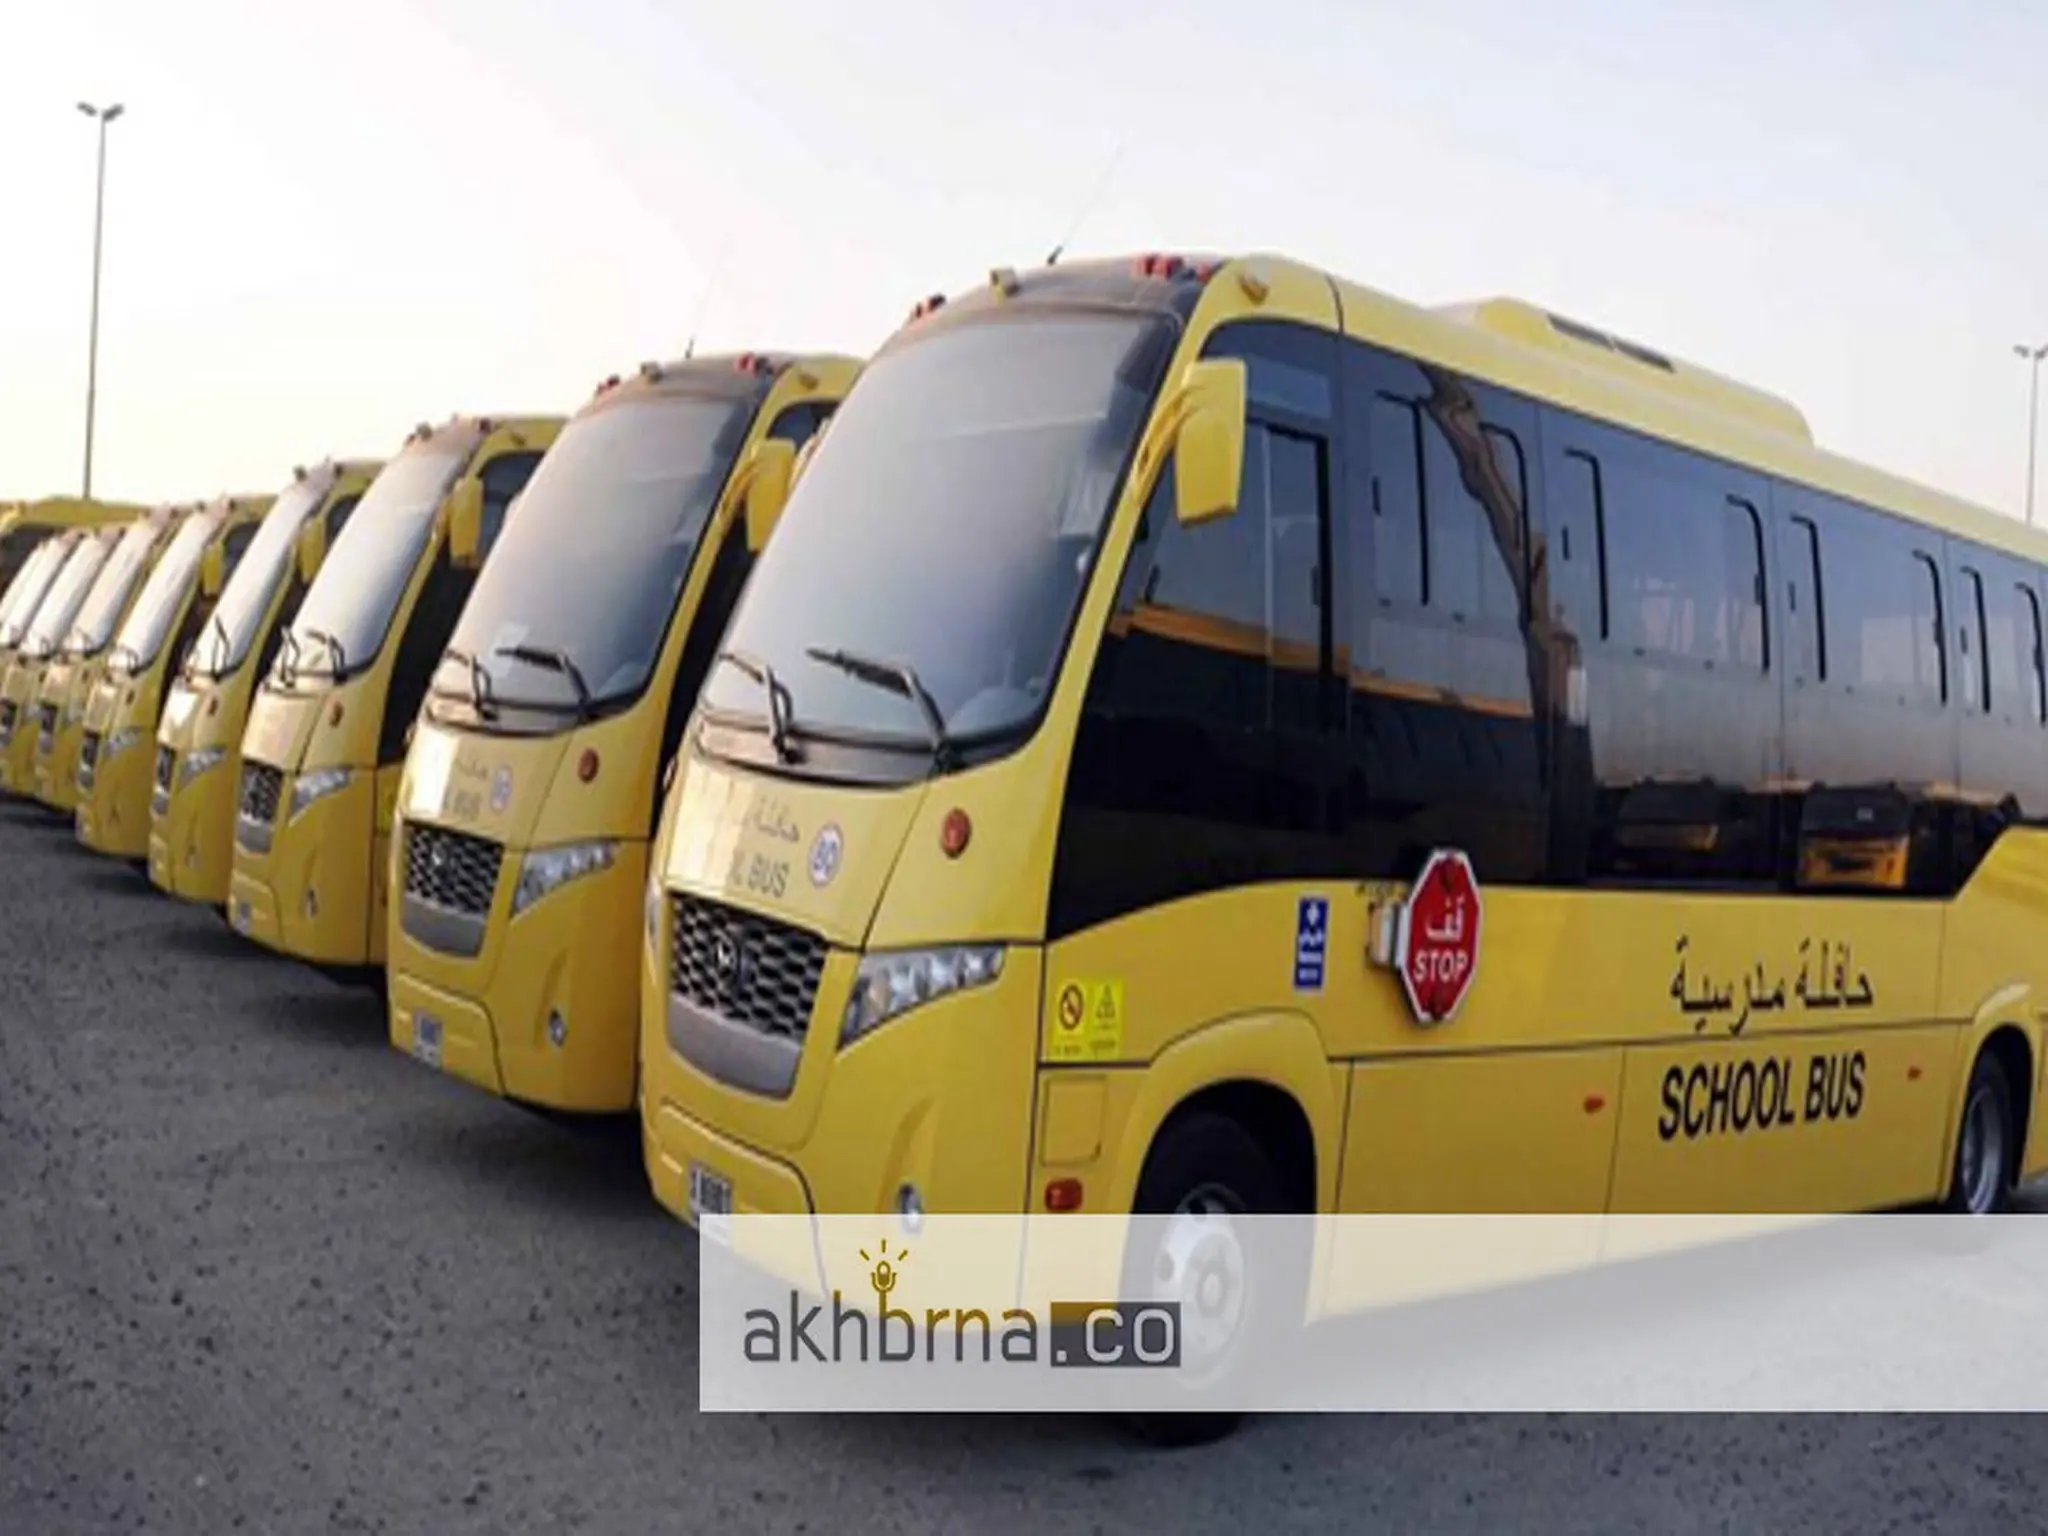 Dubai Taxi will expand the DTC school bus app to include 58 public schools and 20,000 kids